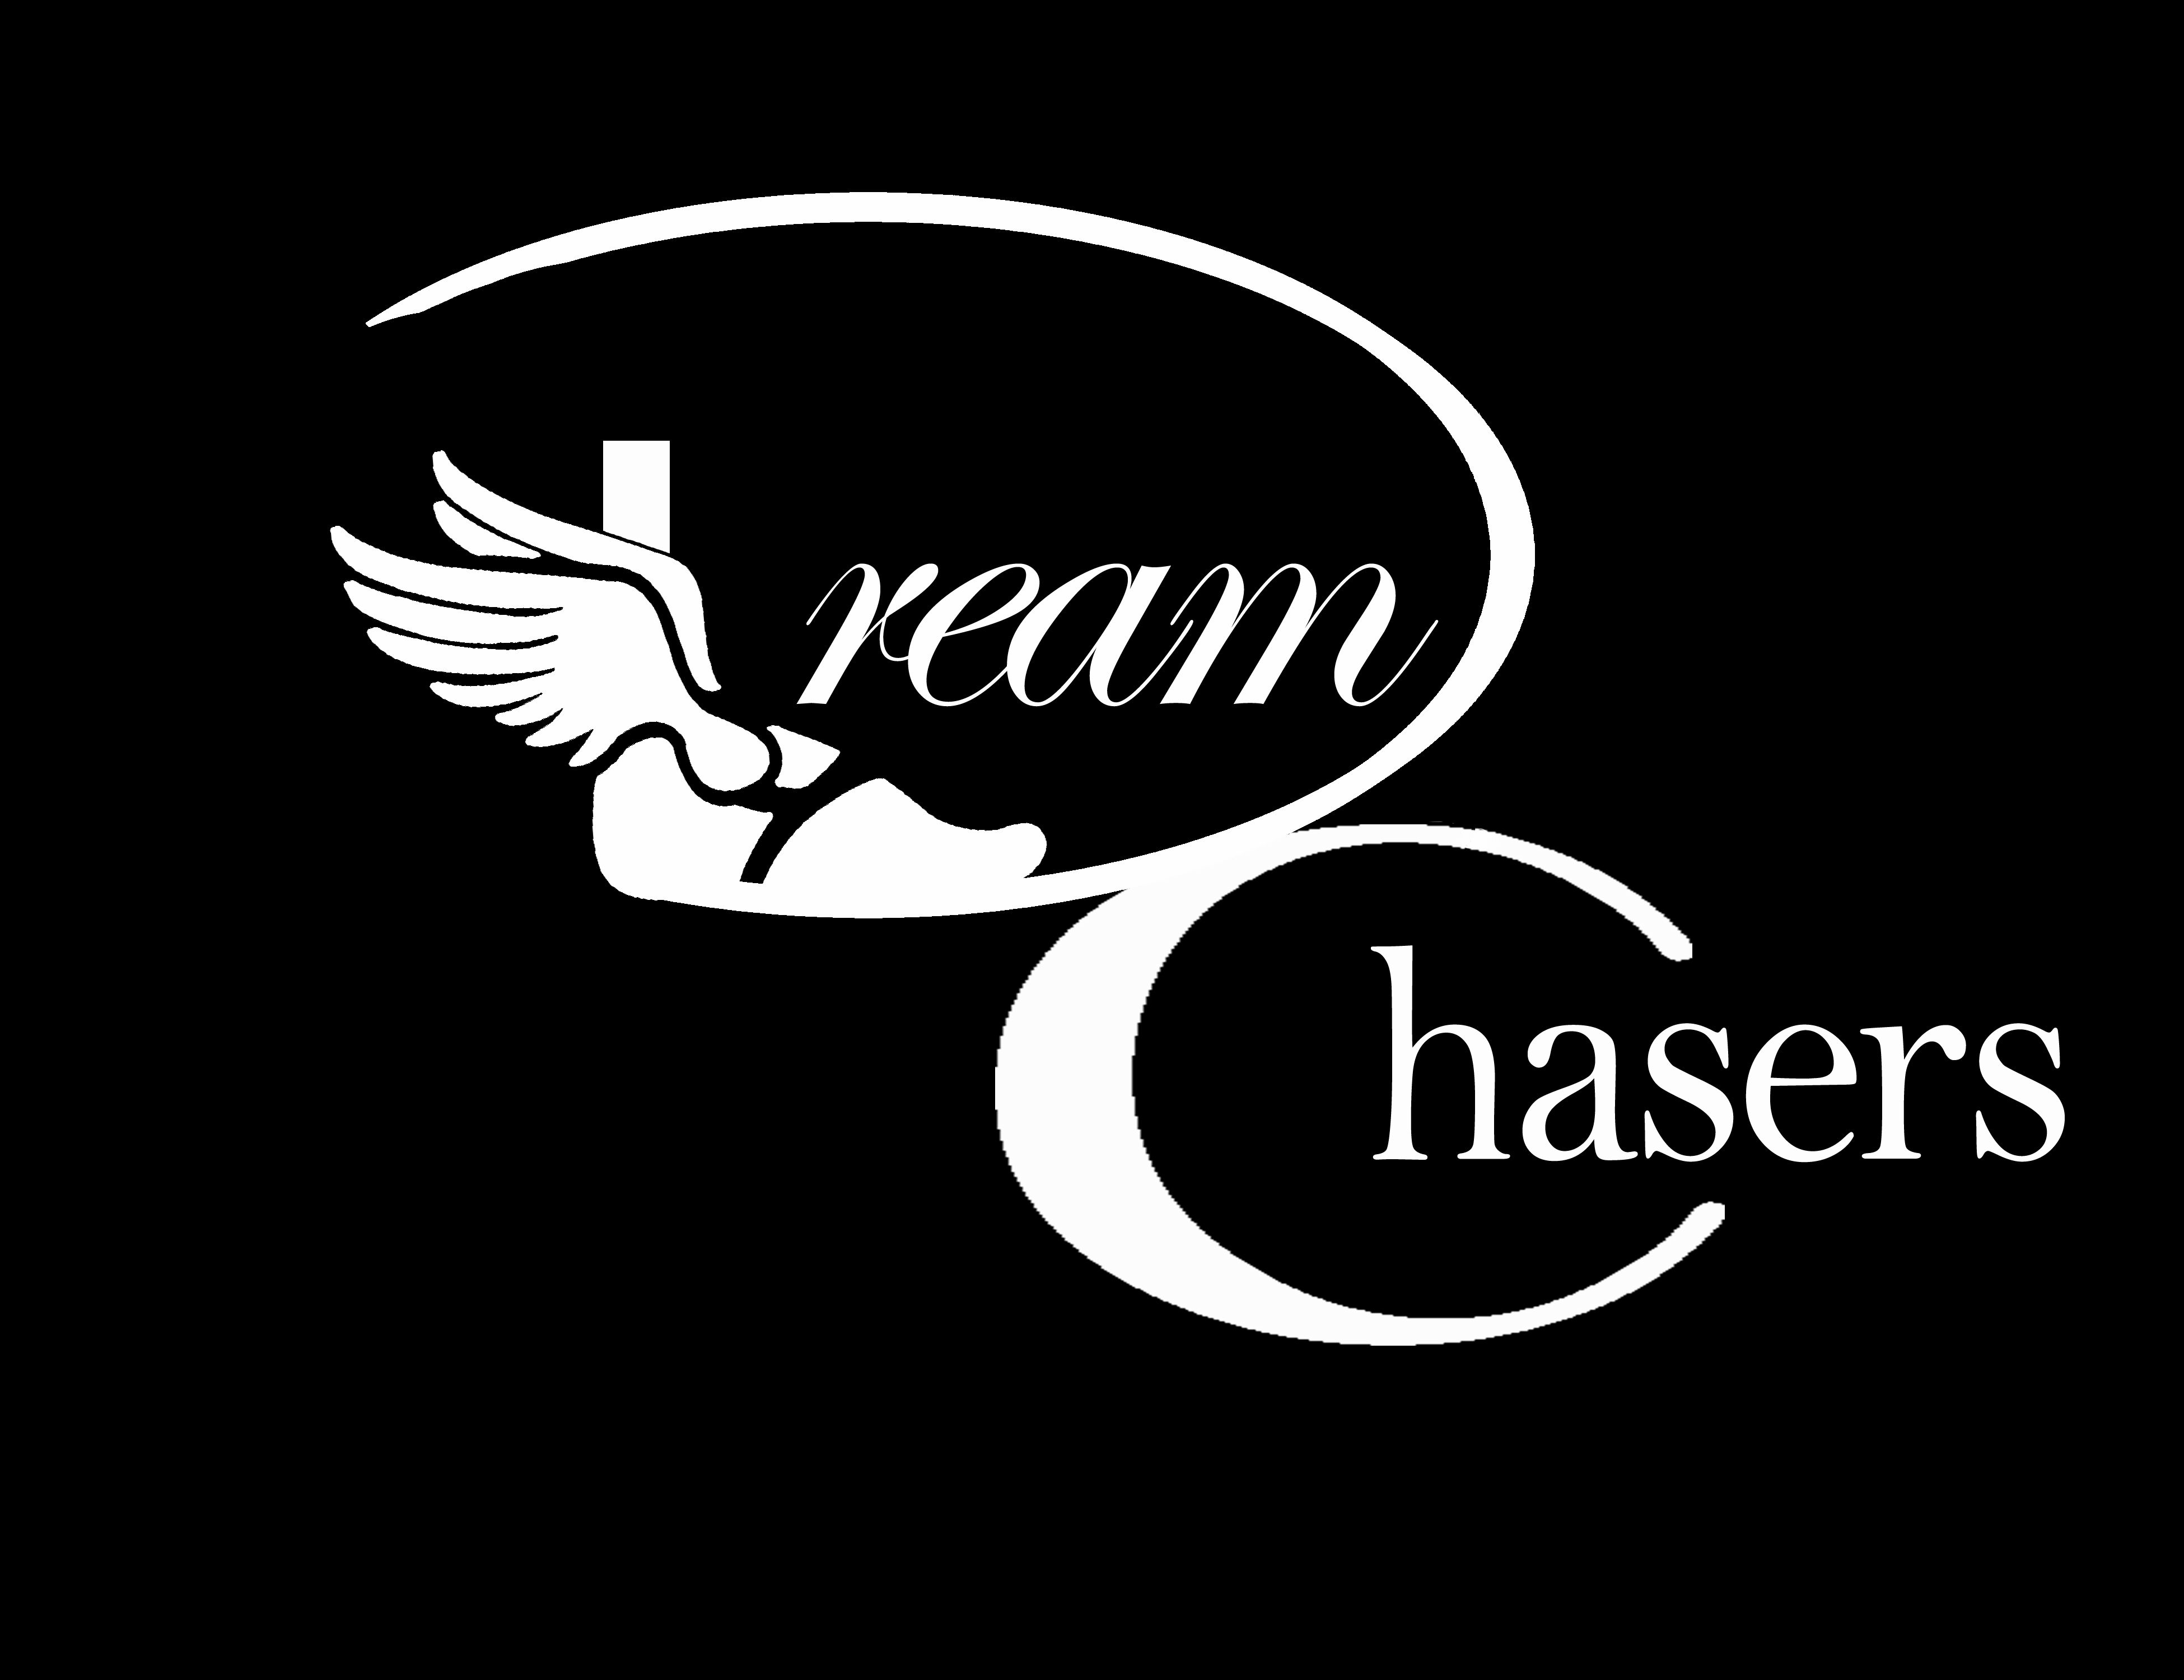 Dream chasers Logos